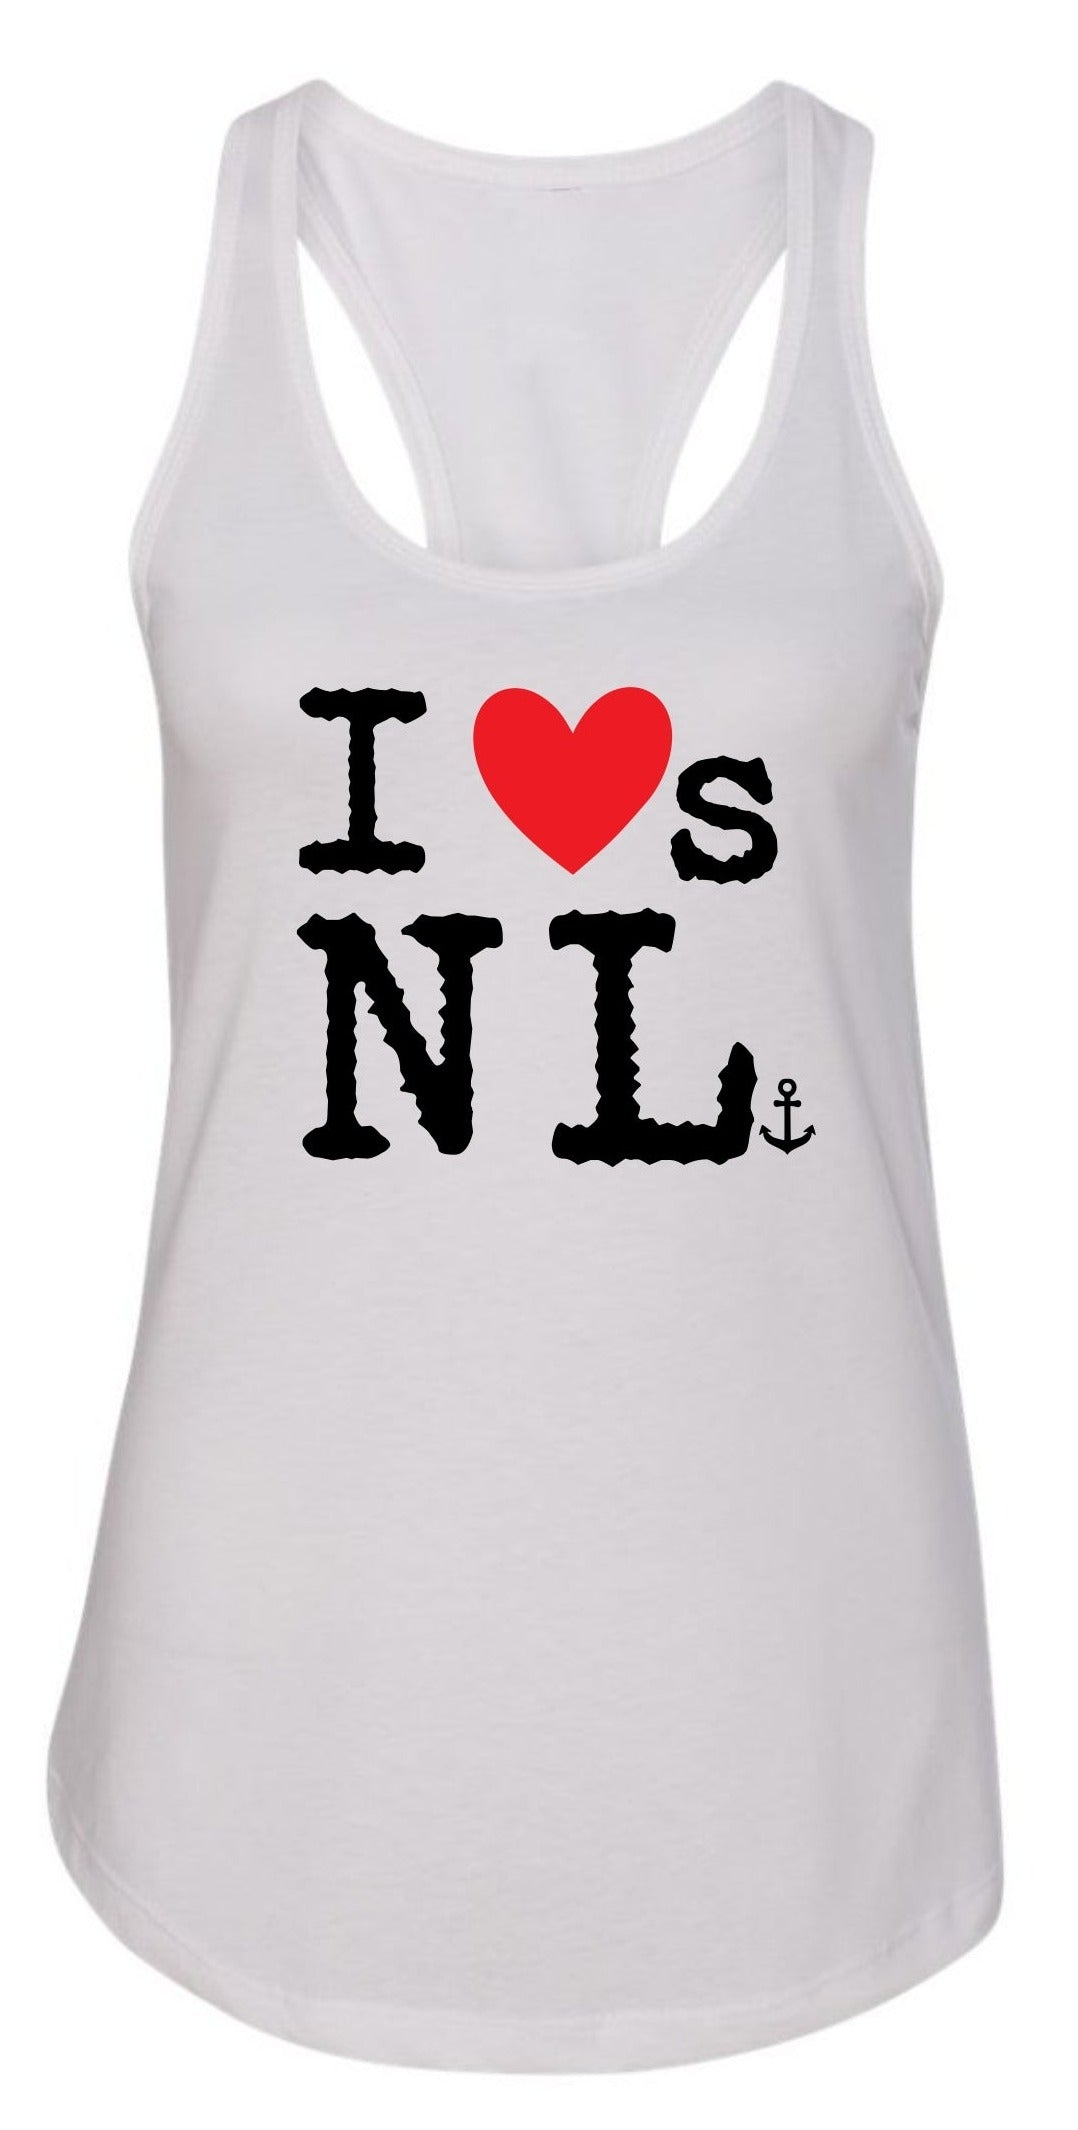 "I Loves NL" Red Heart Ladies' Tank Top